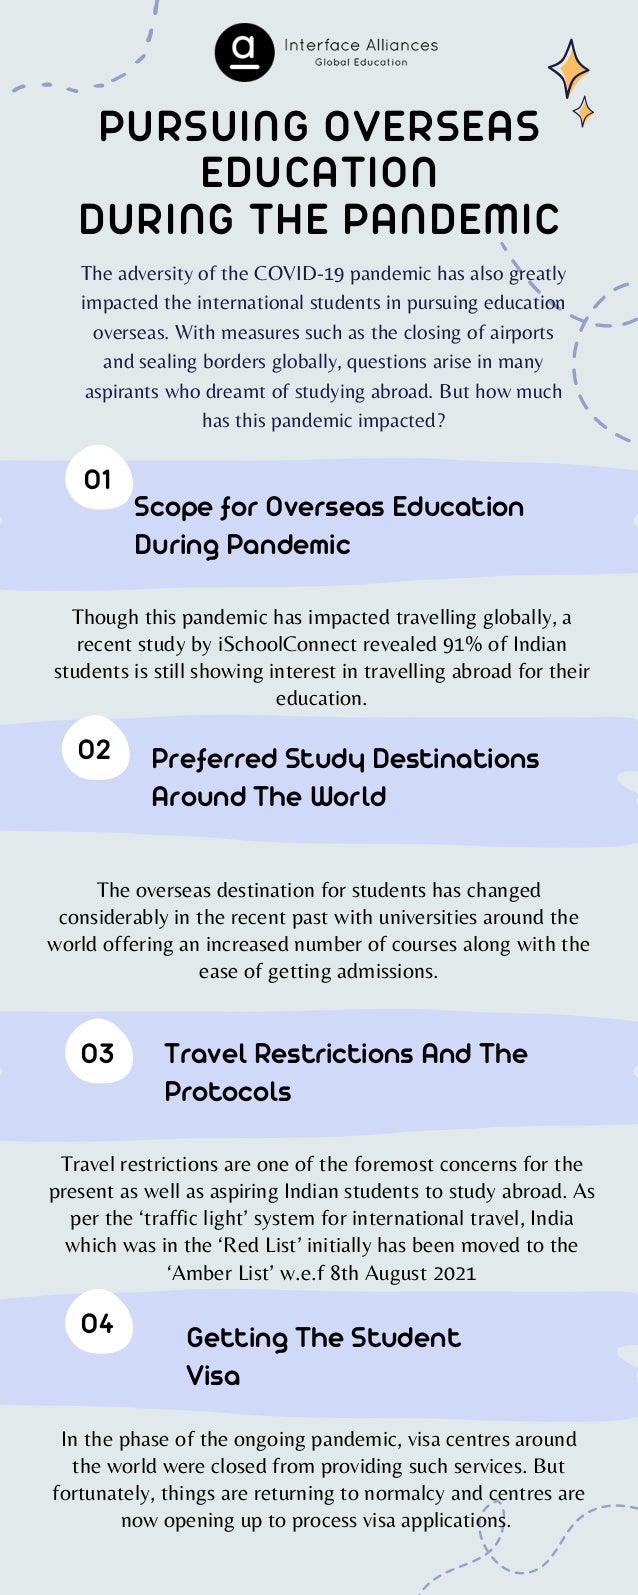 The overseas destination for students has changed

considerably in the recent past with universities around the

world offering an increased number of courses along with the

ease of getting admissions.
PURSUING OVERSEAS

EDUCATION
DURING THE PANDEMIC


The adversity of the COVID-19 pandemic has also greatly

impacted the international students in pursuing education

overseas. With measures such as the closing of airports

and sealing borders globally, questions arise in many

aspirants who dreamt of studying abroad. But how much

has this pandemic impacted?
01
03
04
02
Scope for Overseas Education

During Pandemic
Travel Restrictions And The

Protocols
Getting The Student

Visa
Preferred Study Destinations

Around The World
Though this pandemic has impacted travelling globally, a

recent study by iSchoolConnect revealed 91% of Indian

students is still showing interest in travelling abroad for their

education.
Travel restrictions are one of the foremost concerns for the

present as well as aspiring Indian students to study abroad. As

per the ‘traffic light’ system for international travel, India

which was in the ‘Red List’ initially has been moved to the

‘Amber List’ w.e.f 8th August 2021
In the phase of the ongoing pandemic, visa centres around

the world were closed from providing such services. But

fortunately, things are returning to normalcy and centres are

now opening up to process visa applications.
 